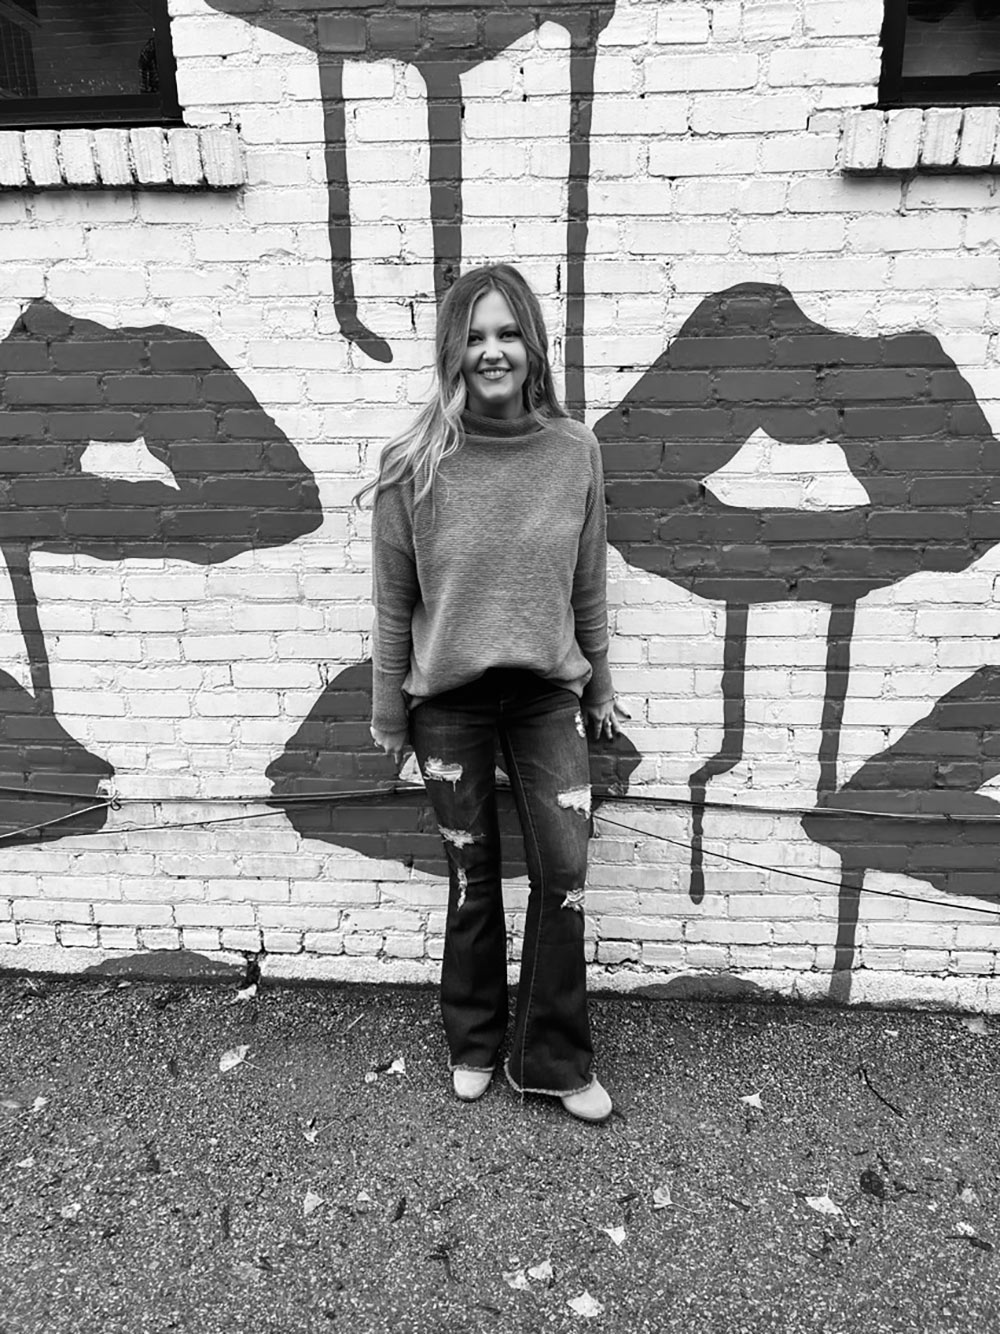 Skylynn Russell stands for photo in front of bricks painted with lips